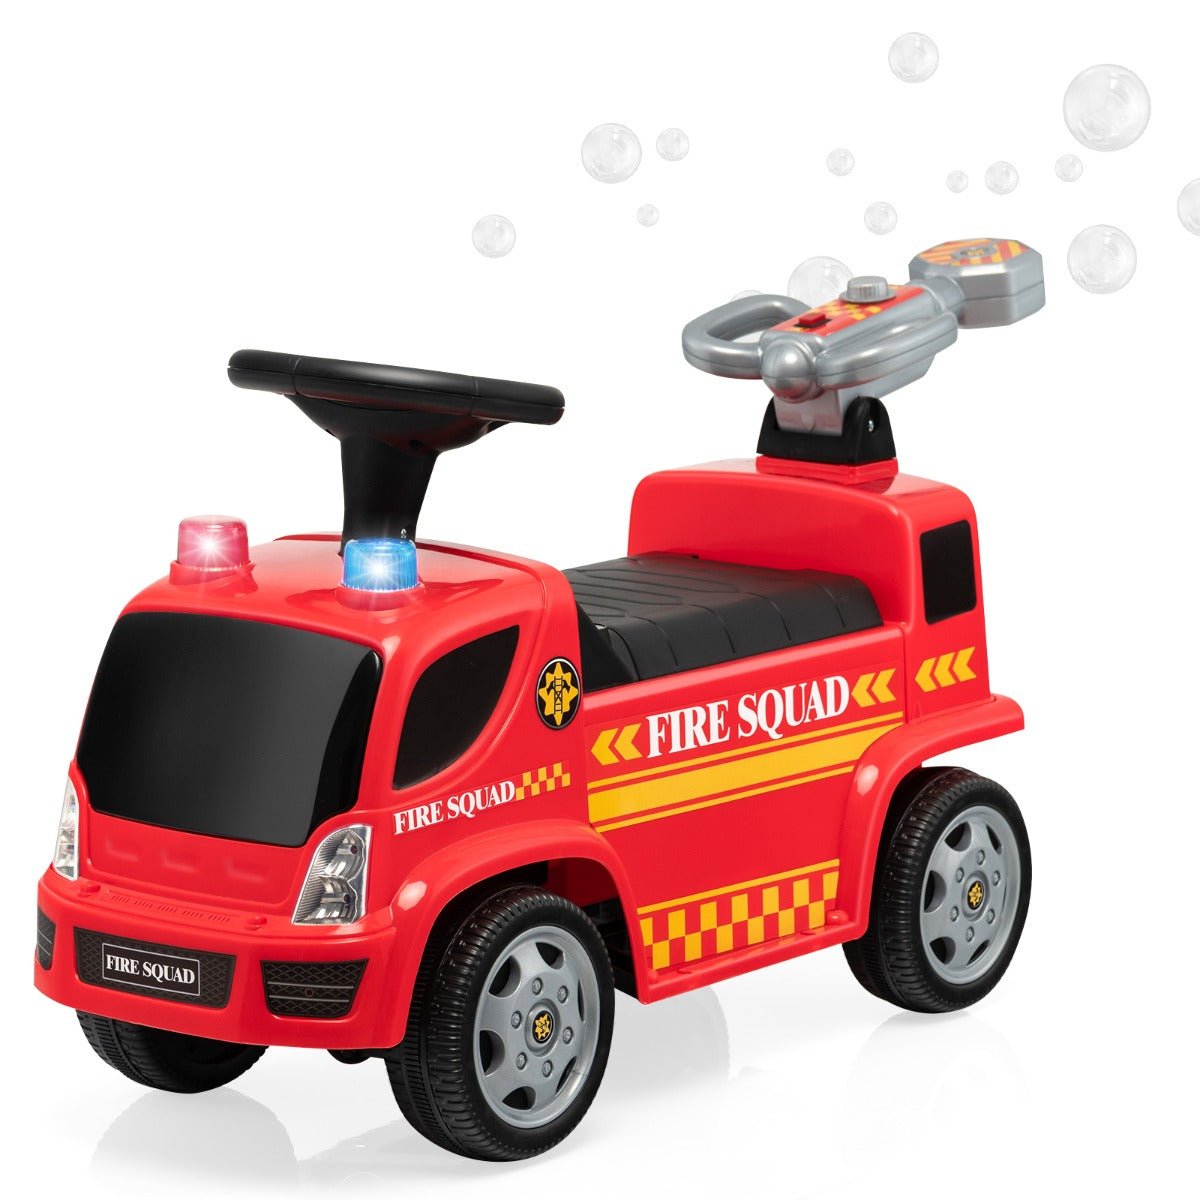 Imaginative Play: Kids Ride On Fire Engine Truck with Bubble Blowing